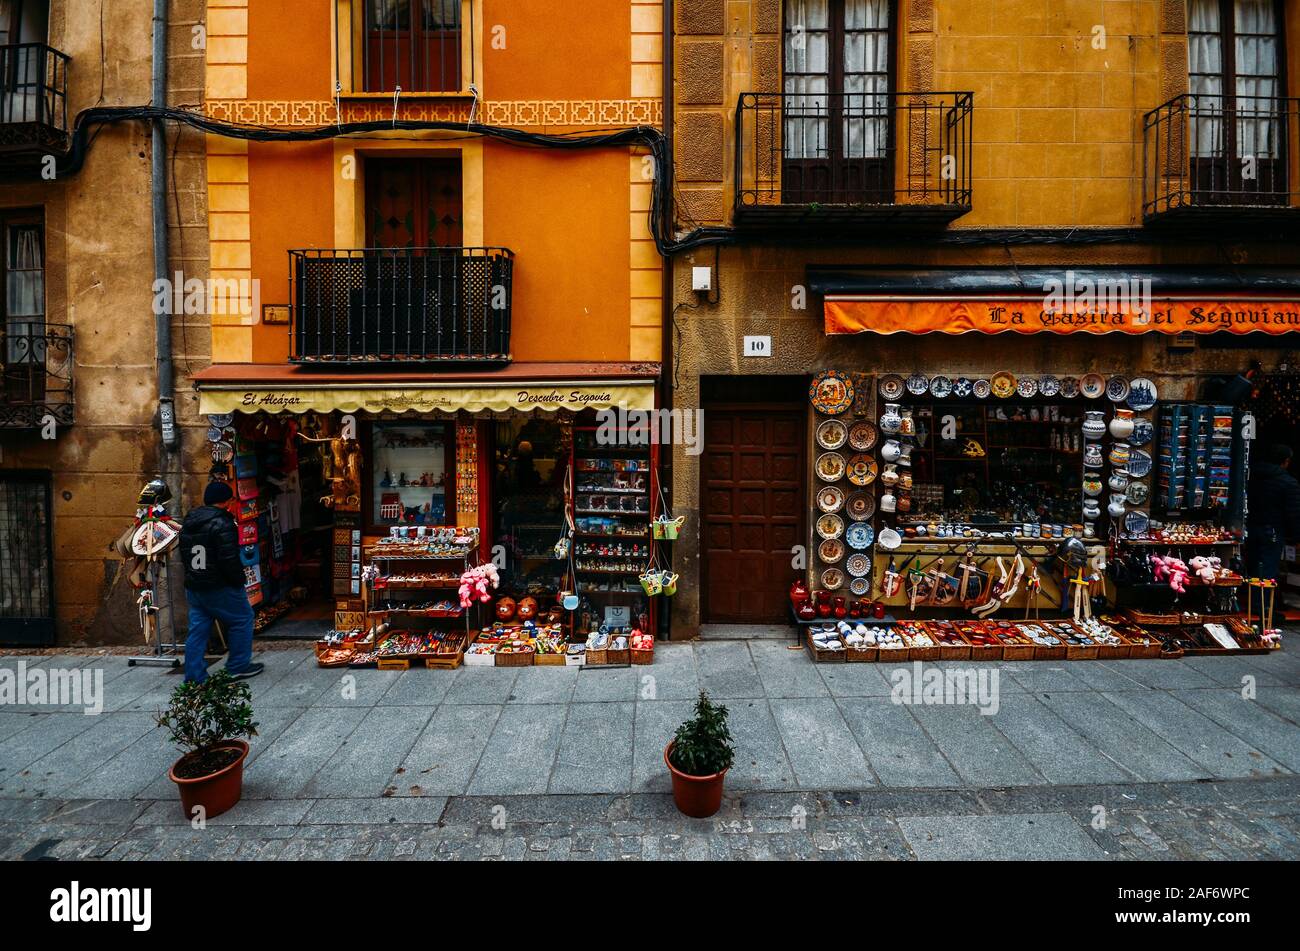 Segovia, Spain - Dec 8, 2019: Tourists walk along a street lined with souvenir shops in the historic centre of Segovia, Spain Stock Photo